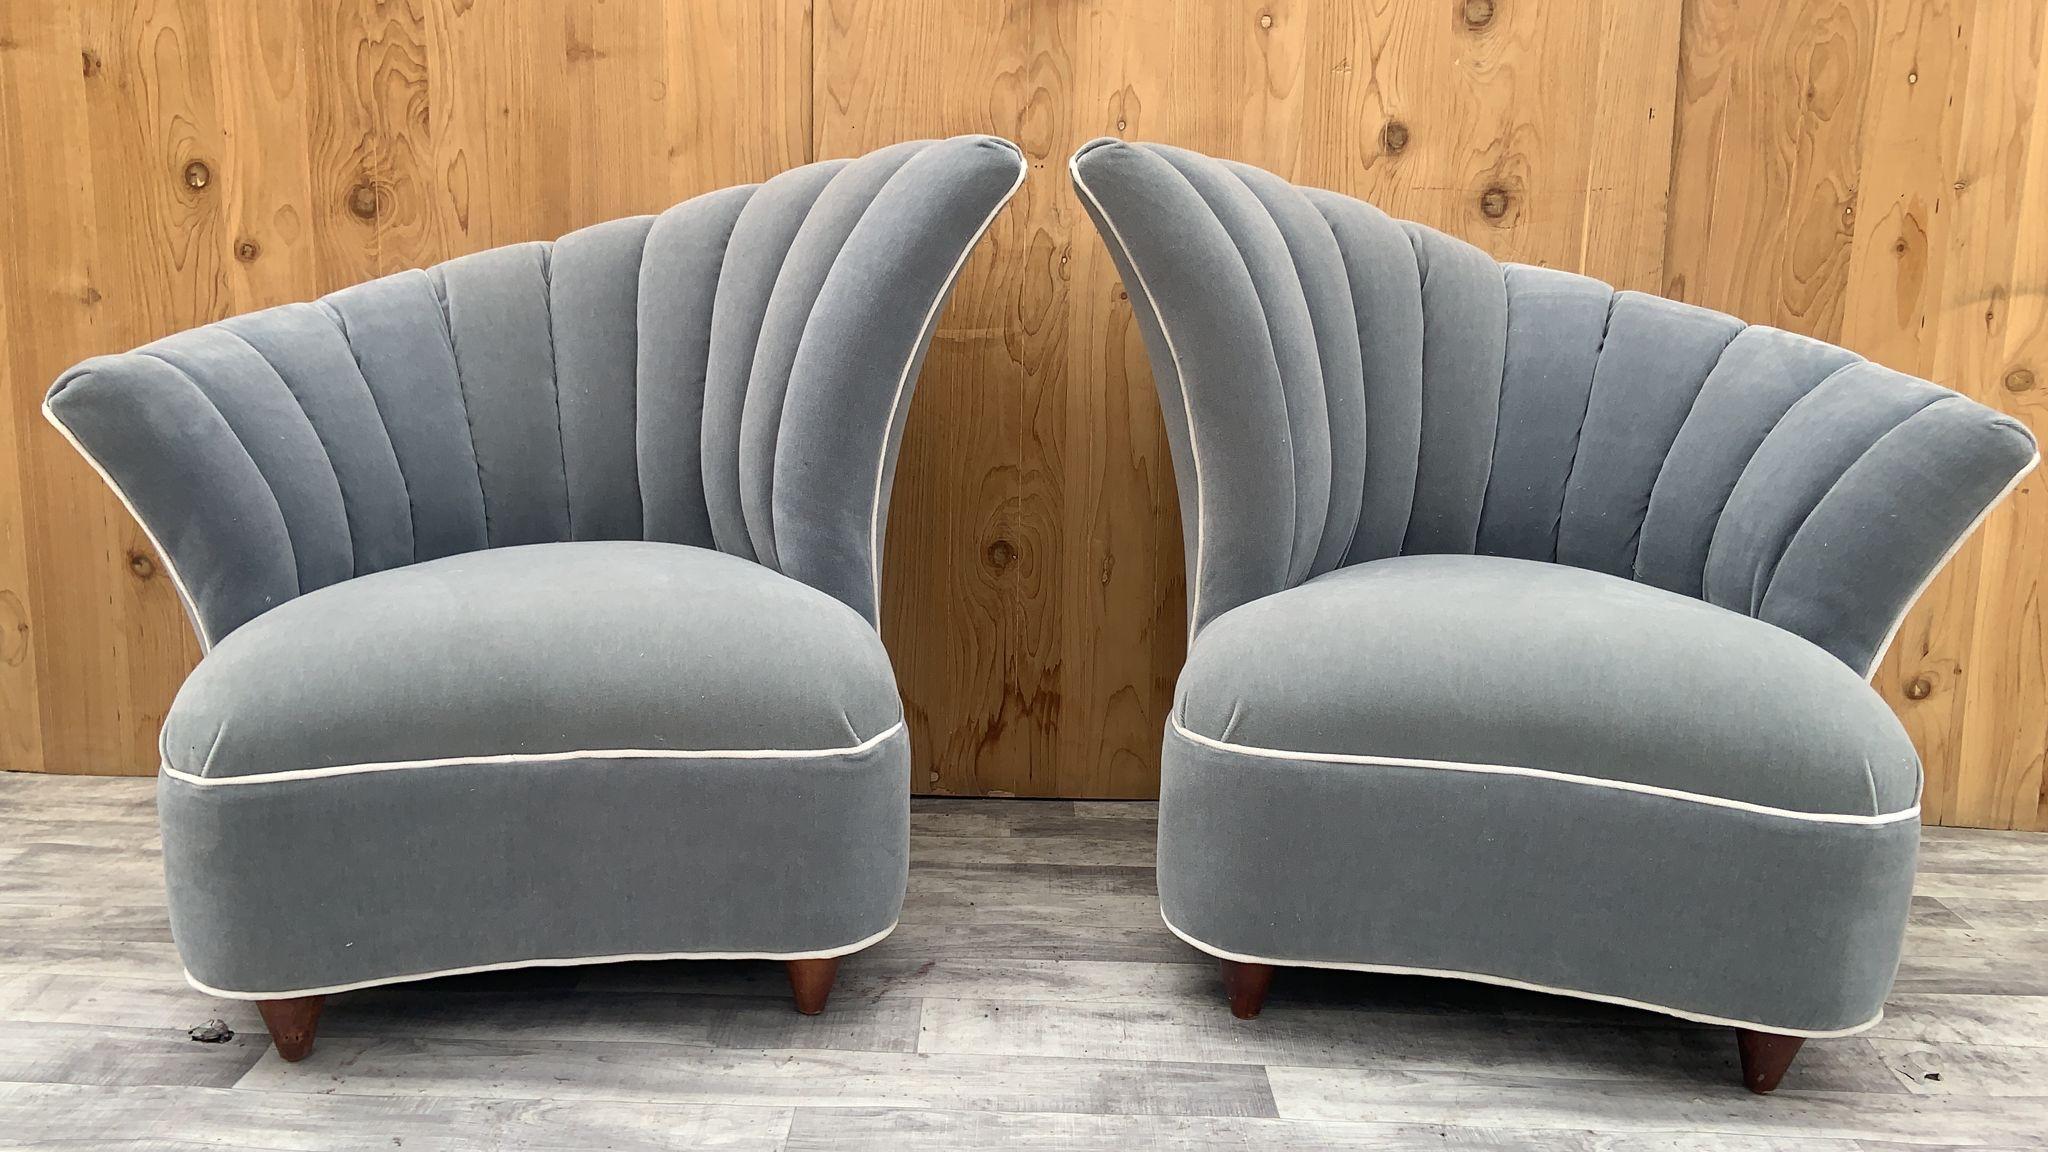 Hollywood Regency Asymmetrical Deco Channel Back Lounge Newly Upholstered - Pair For Sale 5